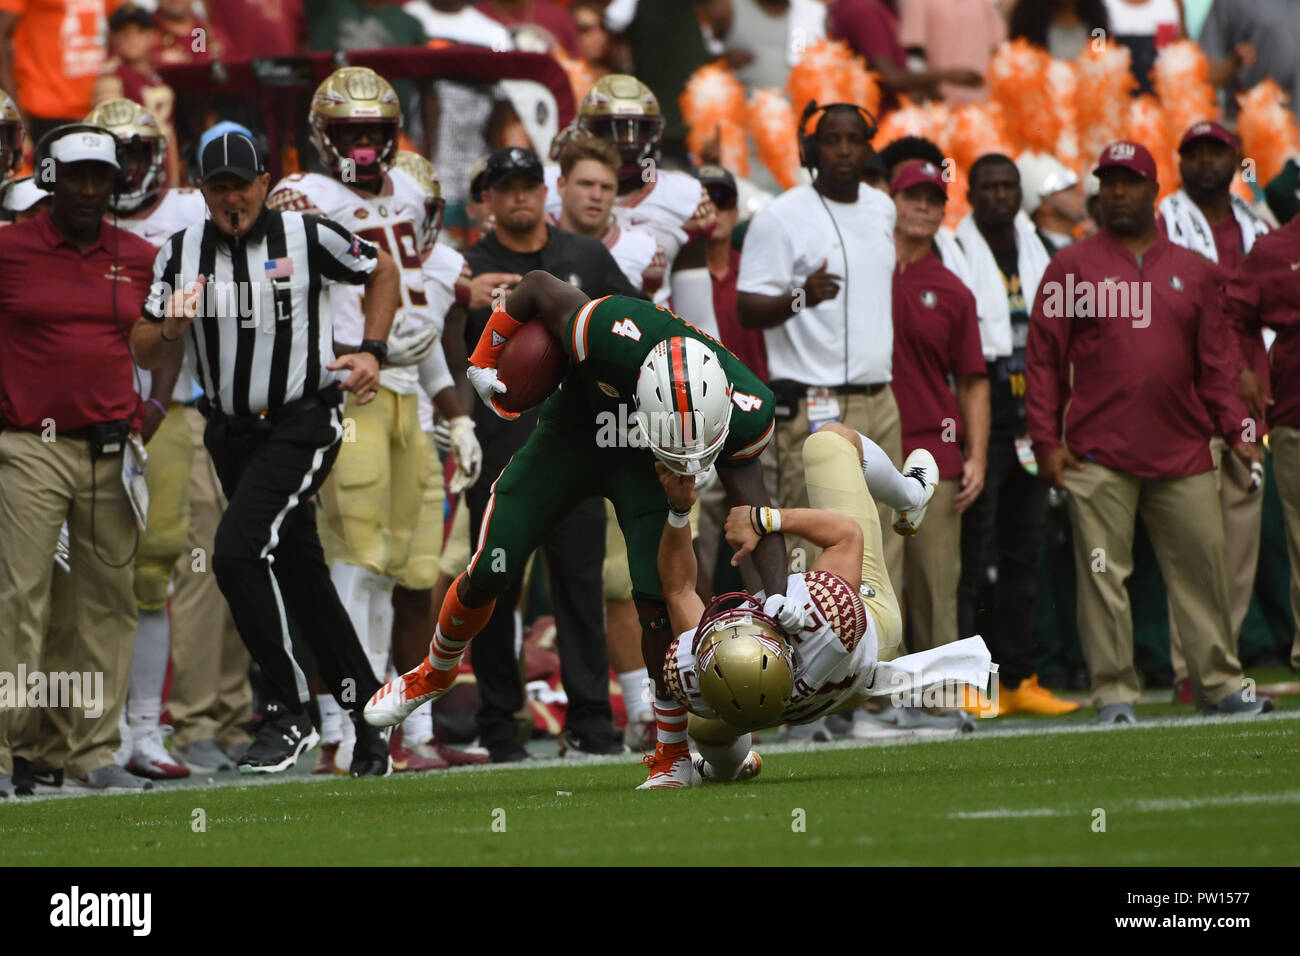 Miami Gardens, Florida, USA. 6th Oct, 2018. Jeff Thomas #4 of Miami is tackled by Logan Tyler #21 of Florida State during the NCAA football game between the Miami Hurricanes and the Florida State Seminoles in Miami Gardens, Florida. The Hurricanes defeated the Seminoles 28-27. Credit: csm/Alamy Live News Stock Photo